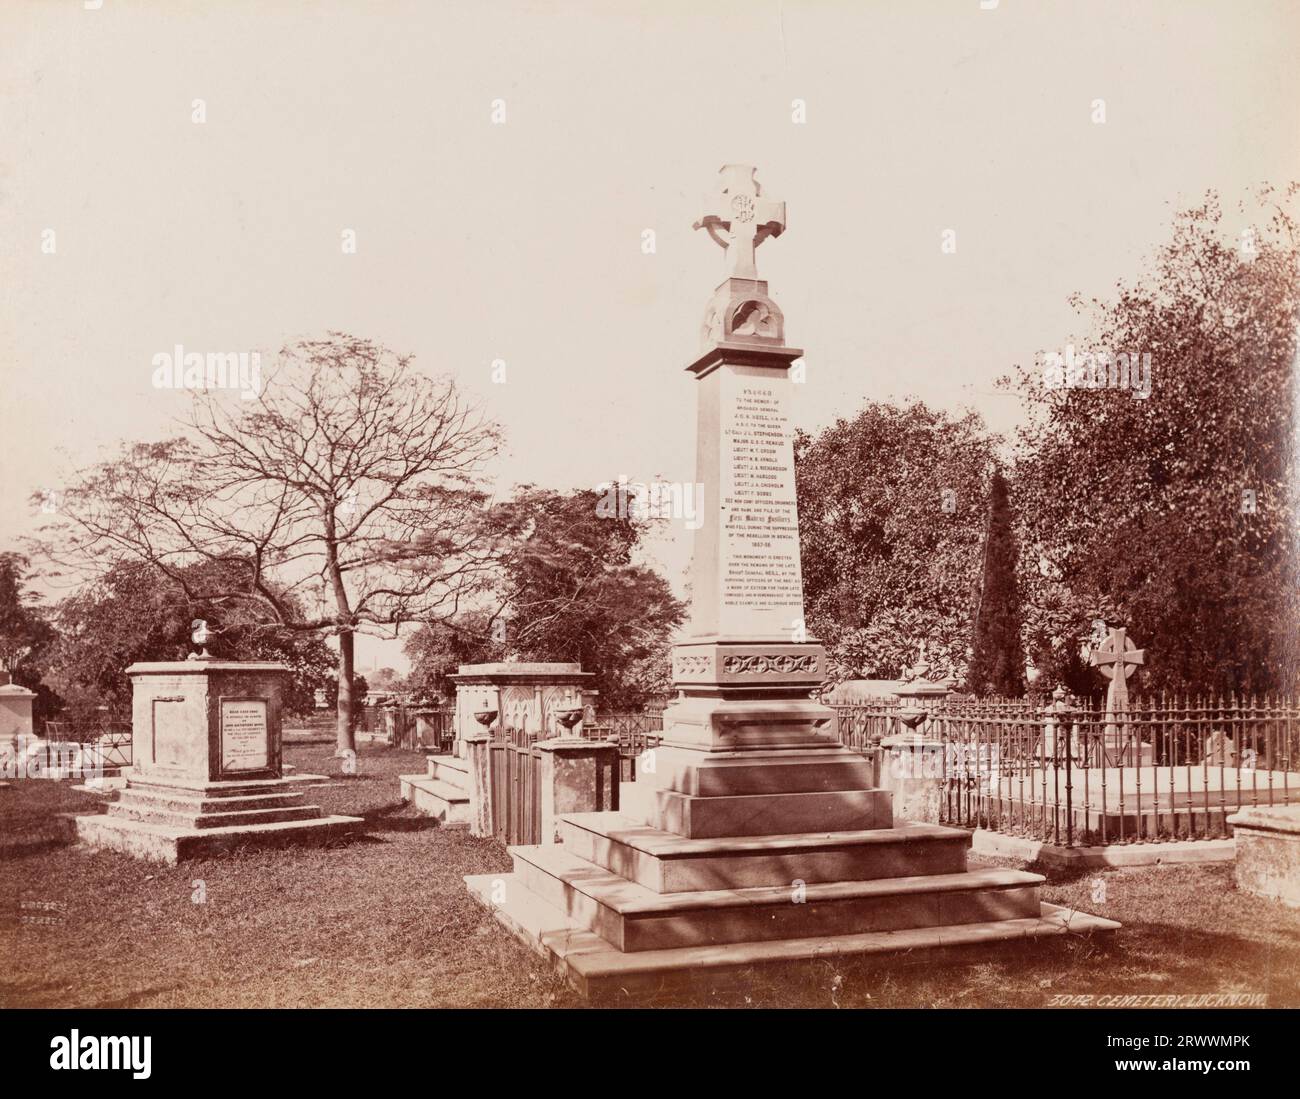 View of a large military memorial mounted with a cross, located in a cemetery. The memorial engraving reads 'To the memory of Brigadier General J C N Neill' and the men of the First Madras Fusiliers, soldiers who fell in the Siege of Lucknow (1857). The memorial is surrounded by other tombs with a manicured lawn and trees. Inscribed on negative: Frith's Series. 3042 Cemetery, Lucknow. Caption reads: Neill's Tomb, Lucknow. Stock Photo